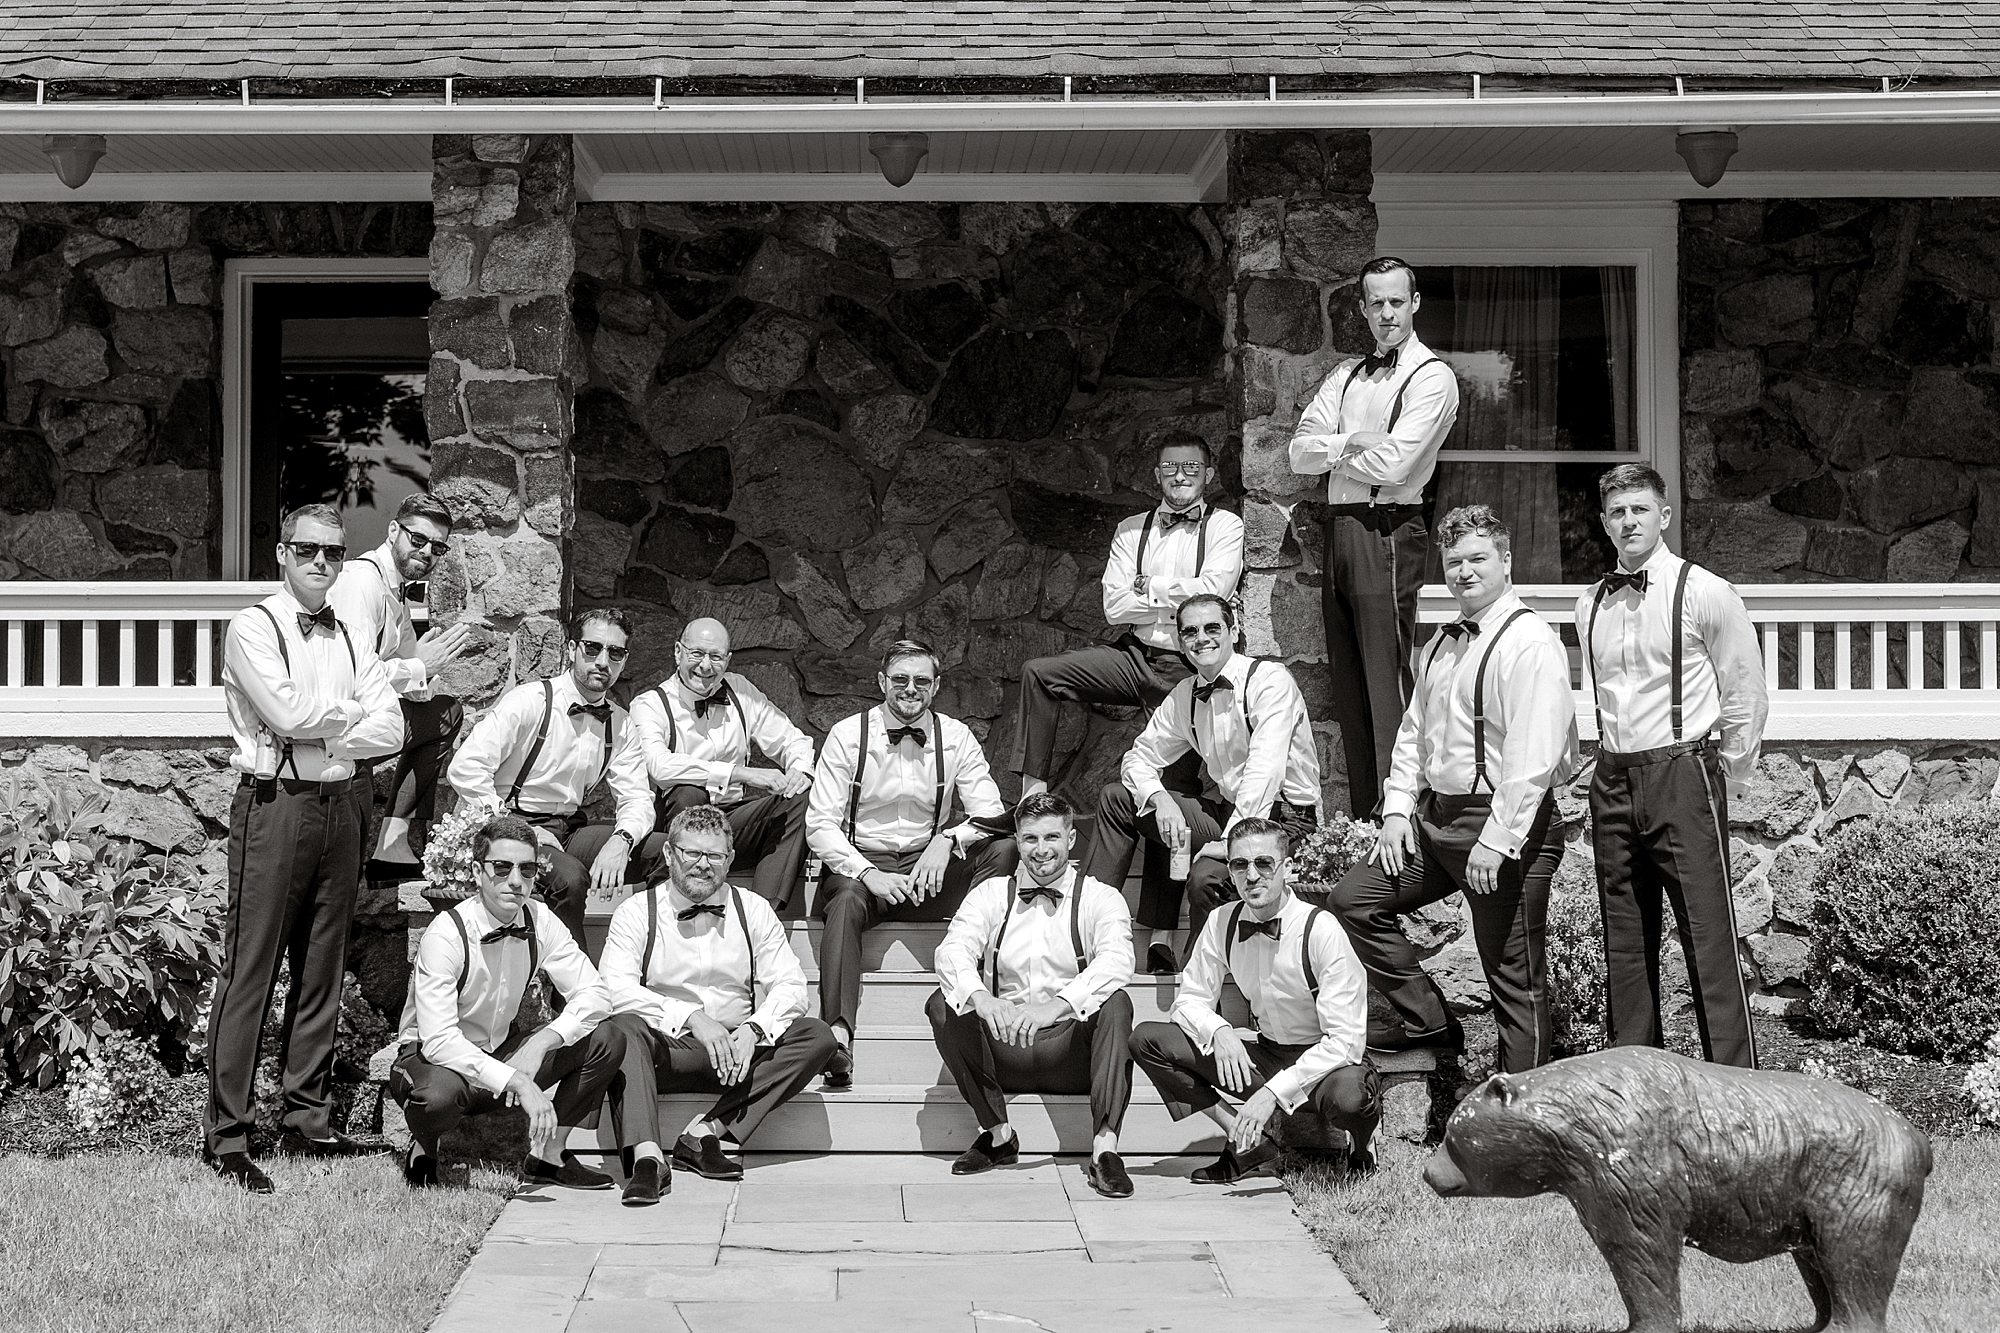 groom poses with 12 groomsmen in suspenders and bow ties on front steps of New Jersey home